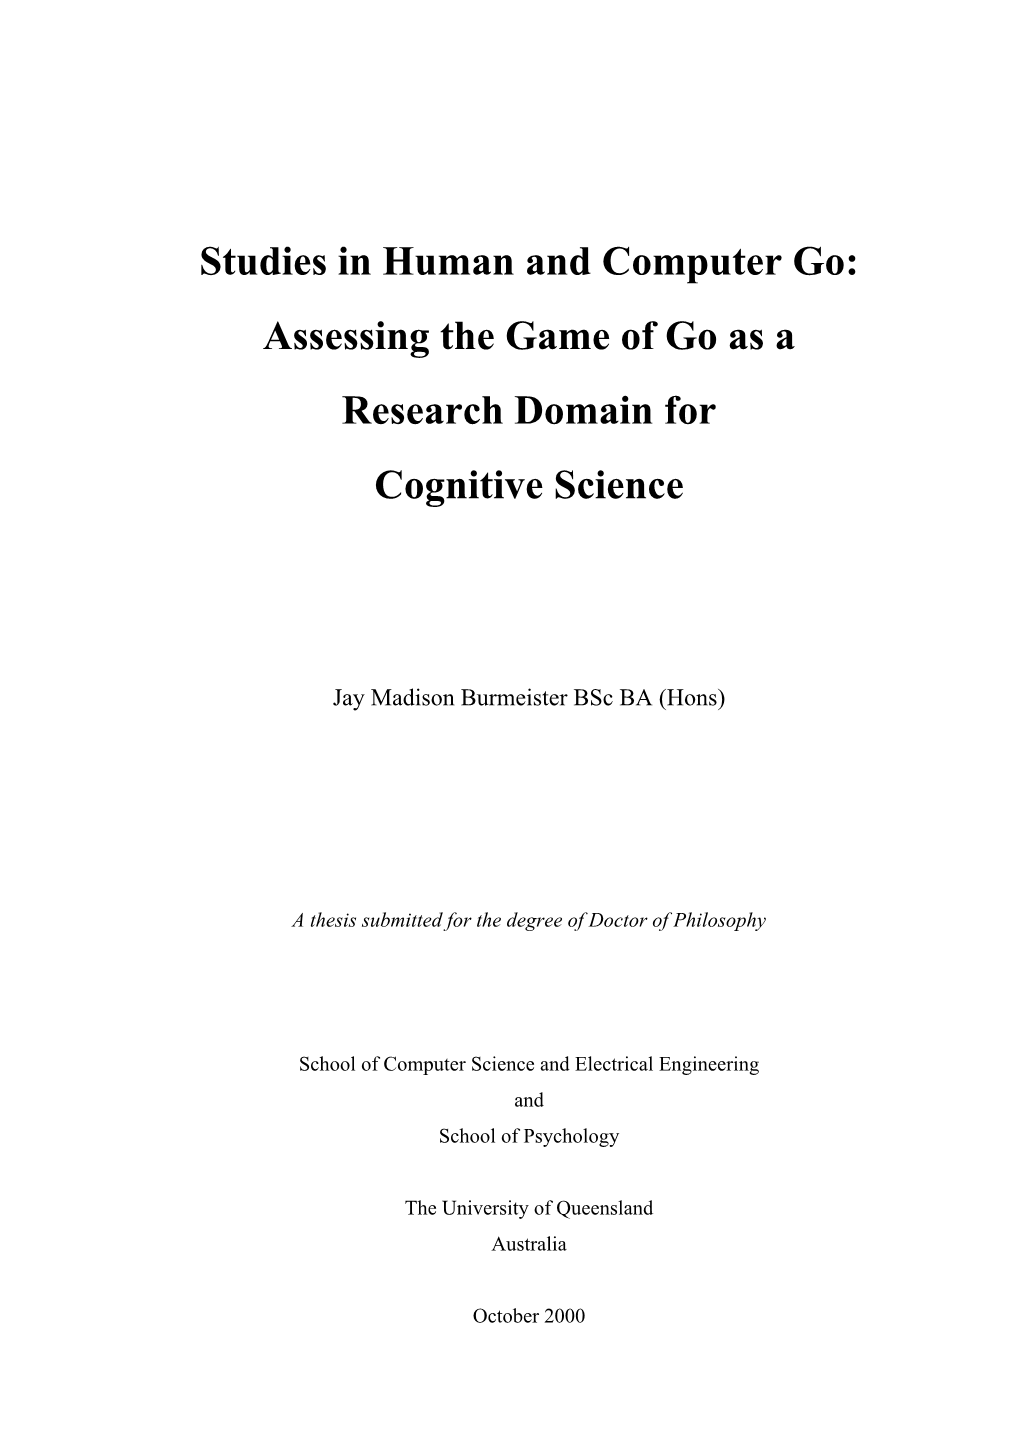 Studies in Human and Computer Go: Assessing the Game of Go As a Research Domain for Cognitive Science